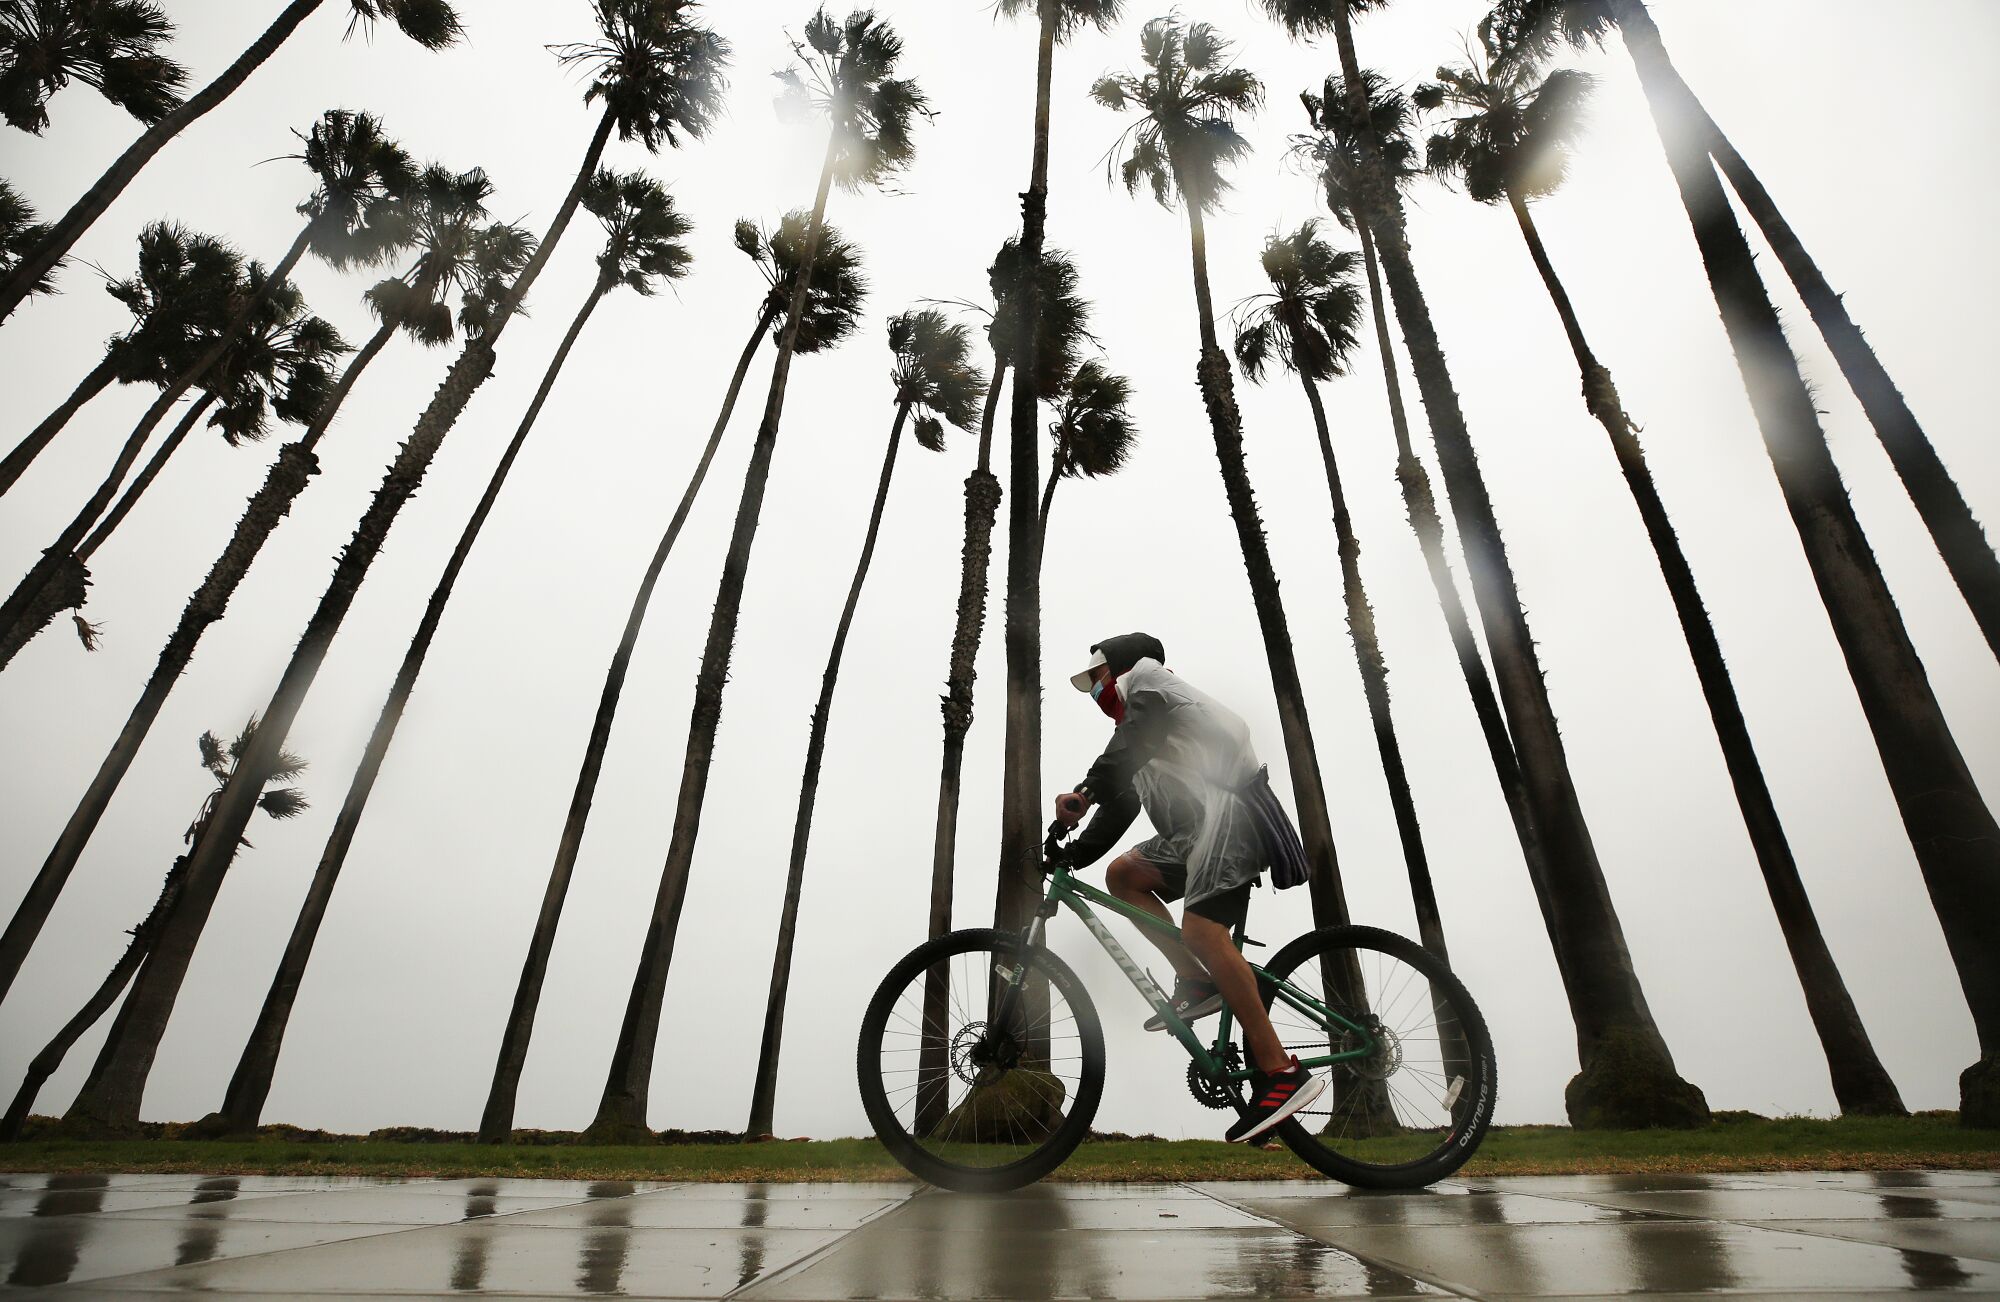 A bicyclist in the rain.